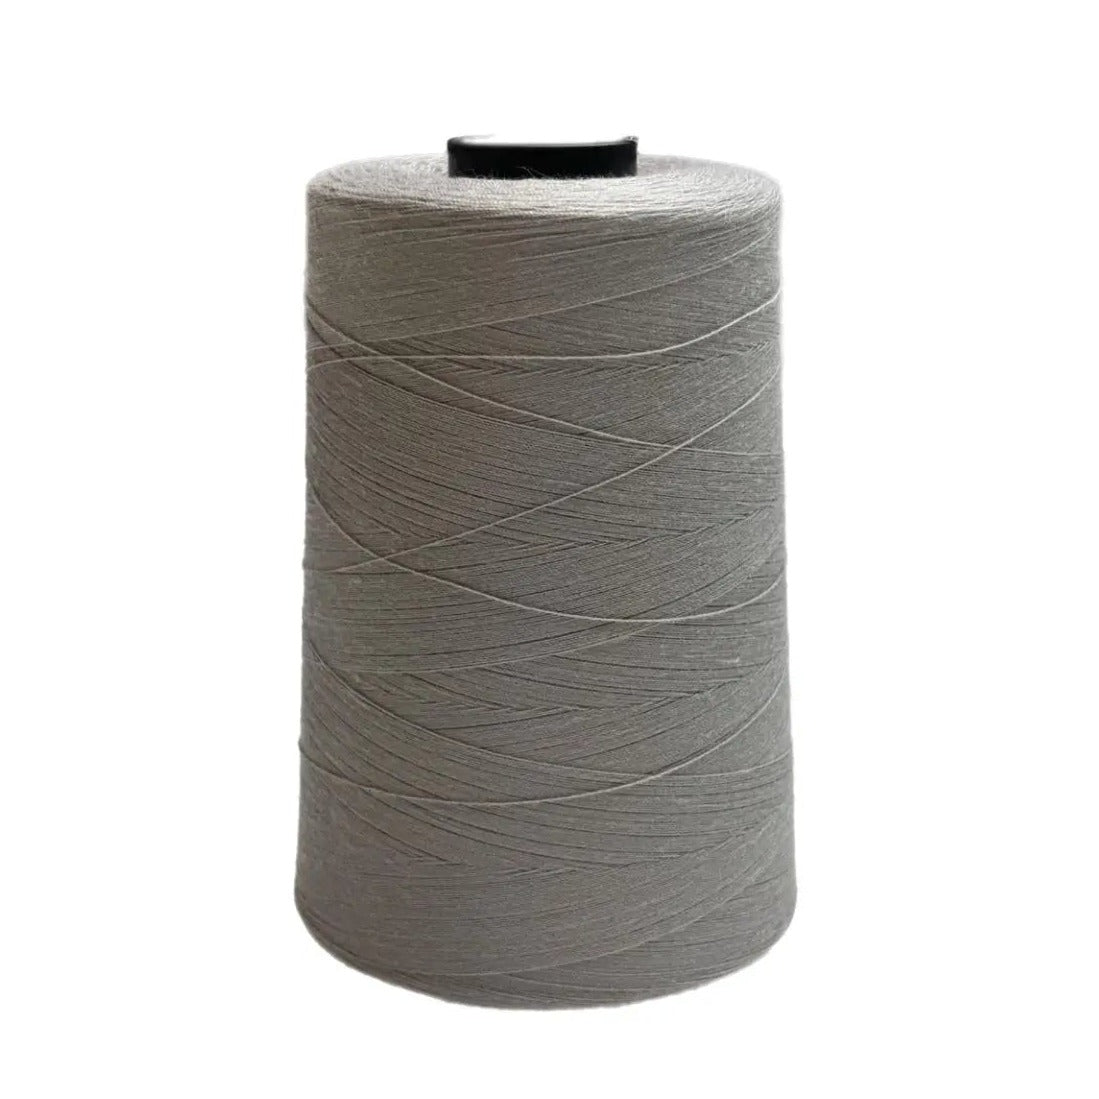 W32020 Silver Perma Core Tex 30 Polyester Thread American & Efird Permacore